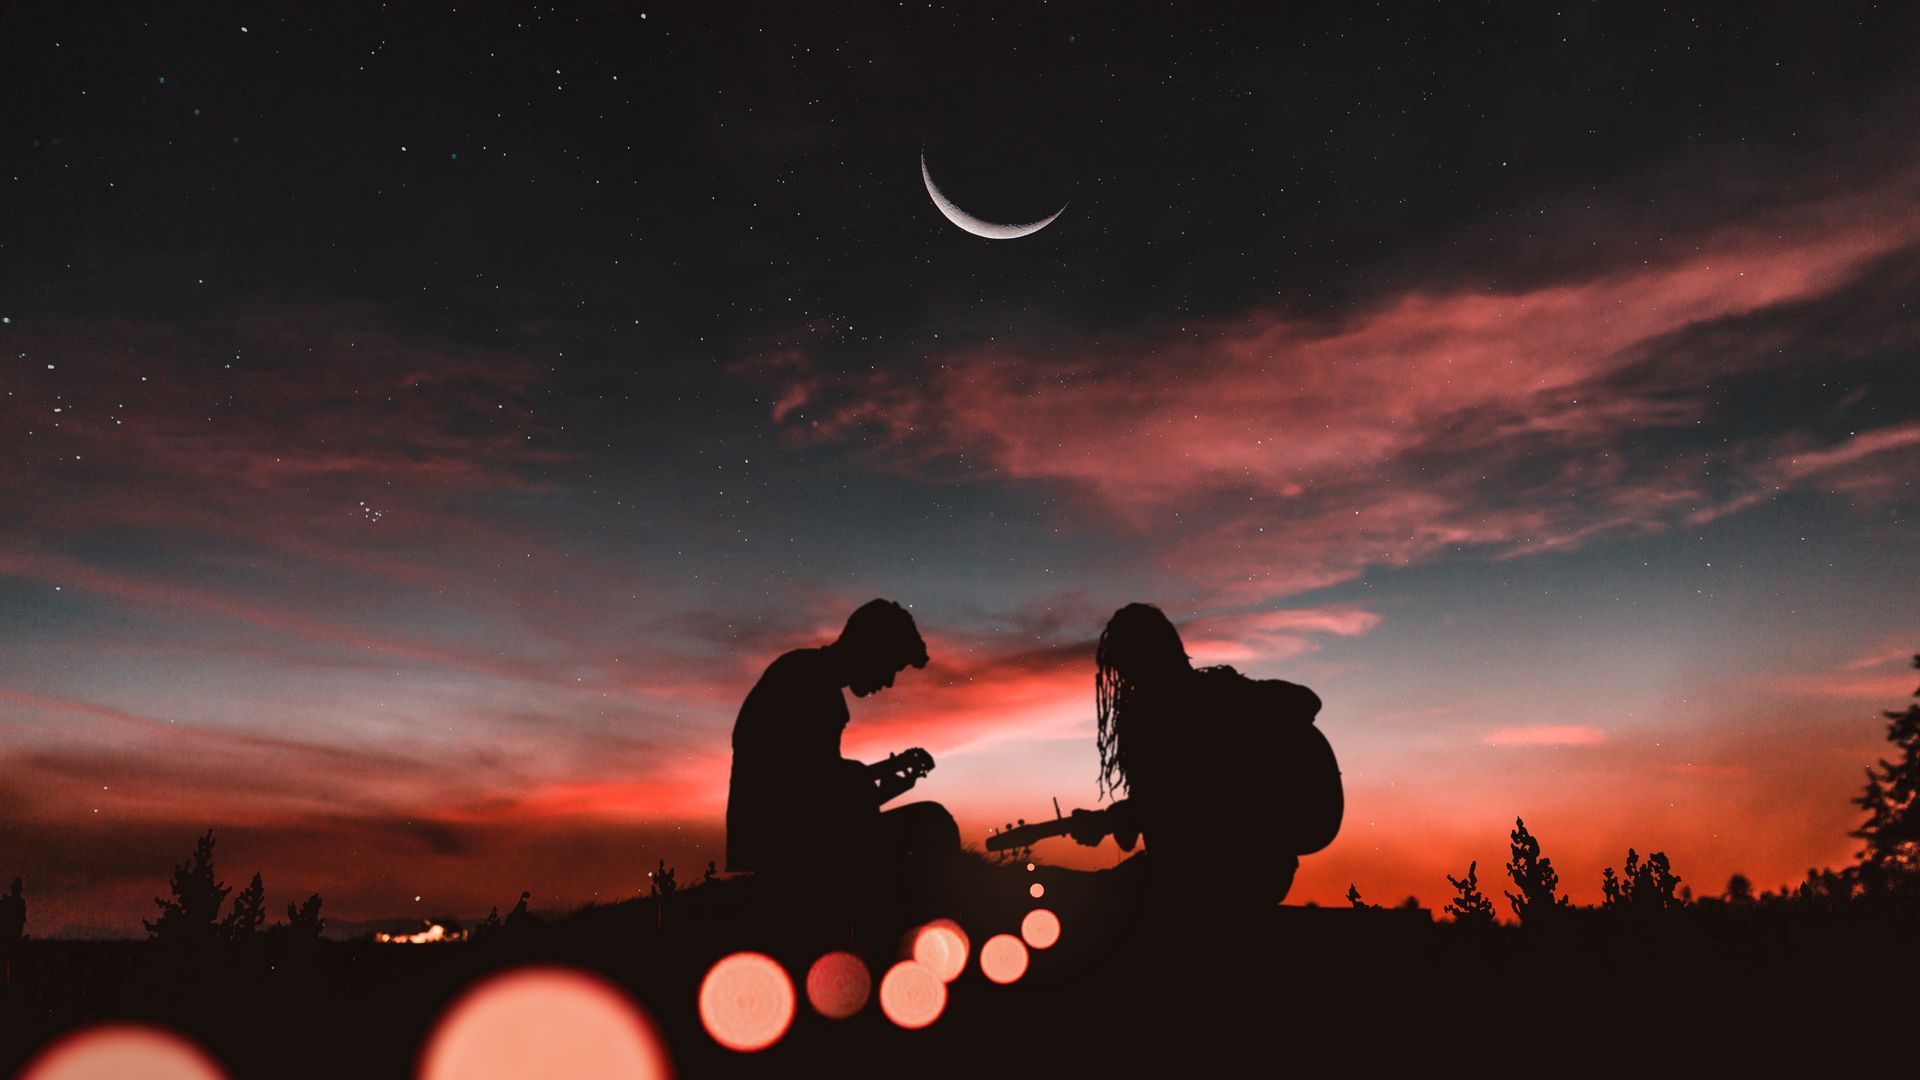 Download wallpaper 1920x1080 silhouettes, couple, guitar, sunset, romance, starry sky full hd, hdtv, fhd, 1080p HD background